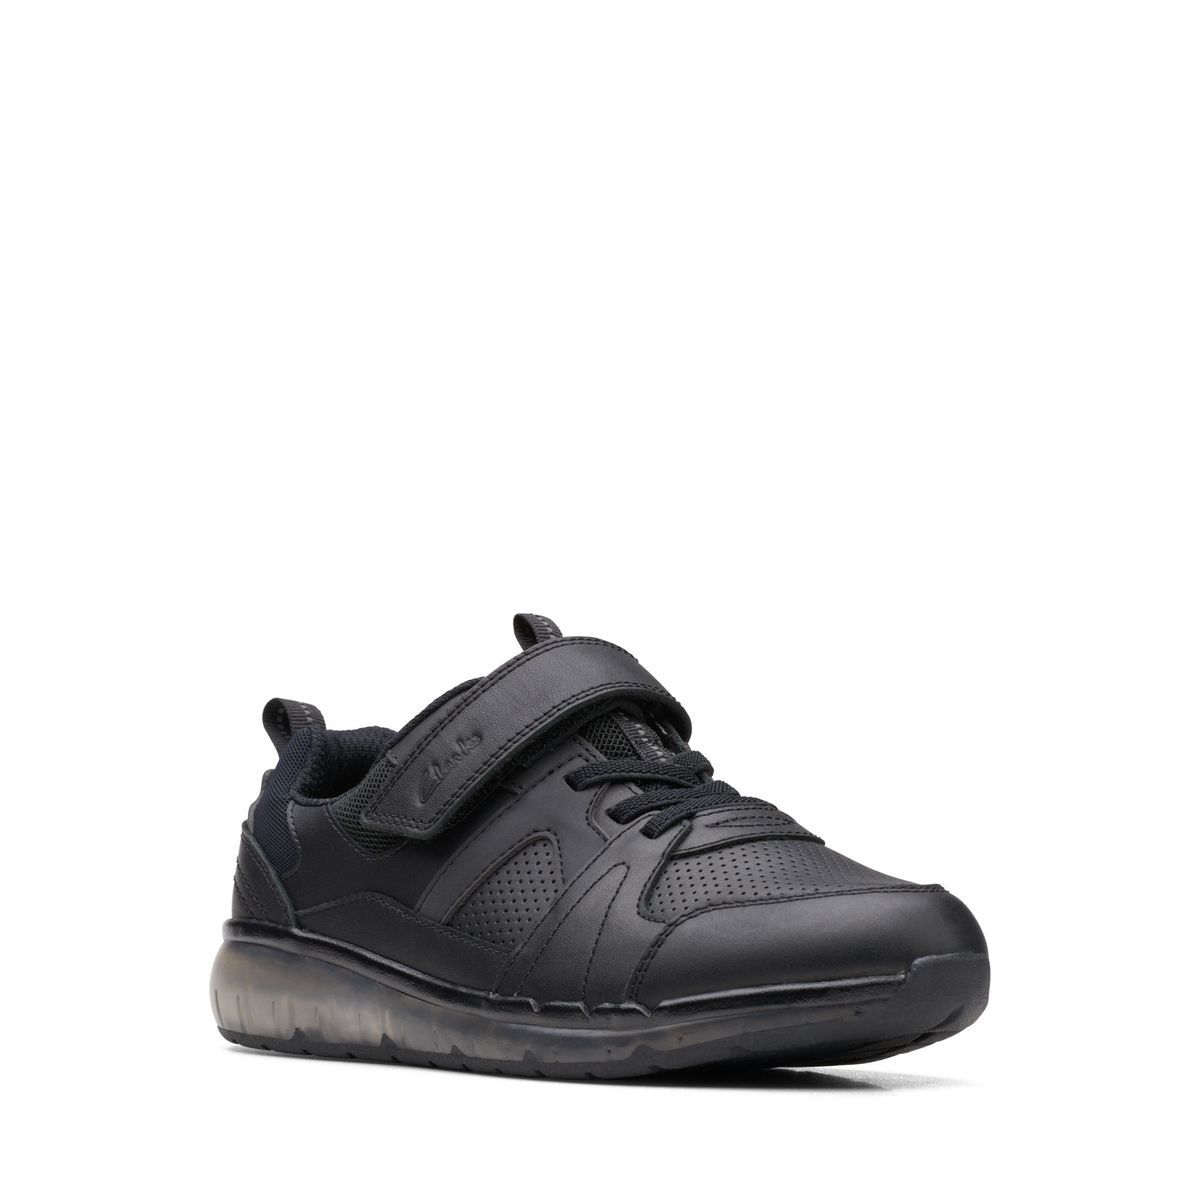 Clarks Spark Beam O Black Leather Kids Boys Trainers 679186F In Size 1 In Plain Black Leather F Width Fitting Regular Fit For kids